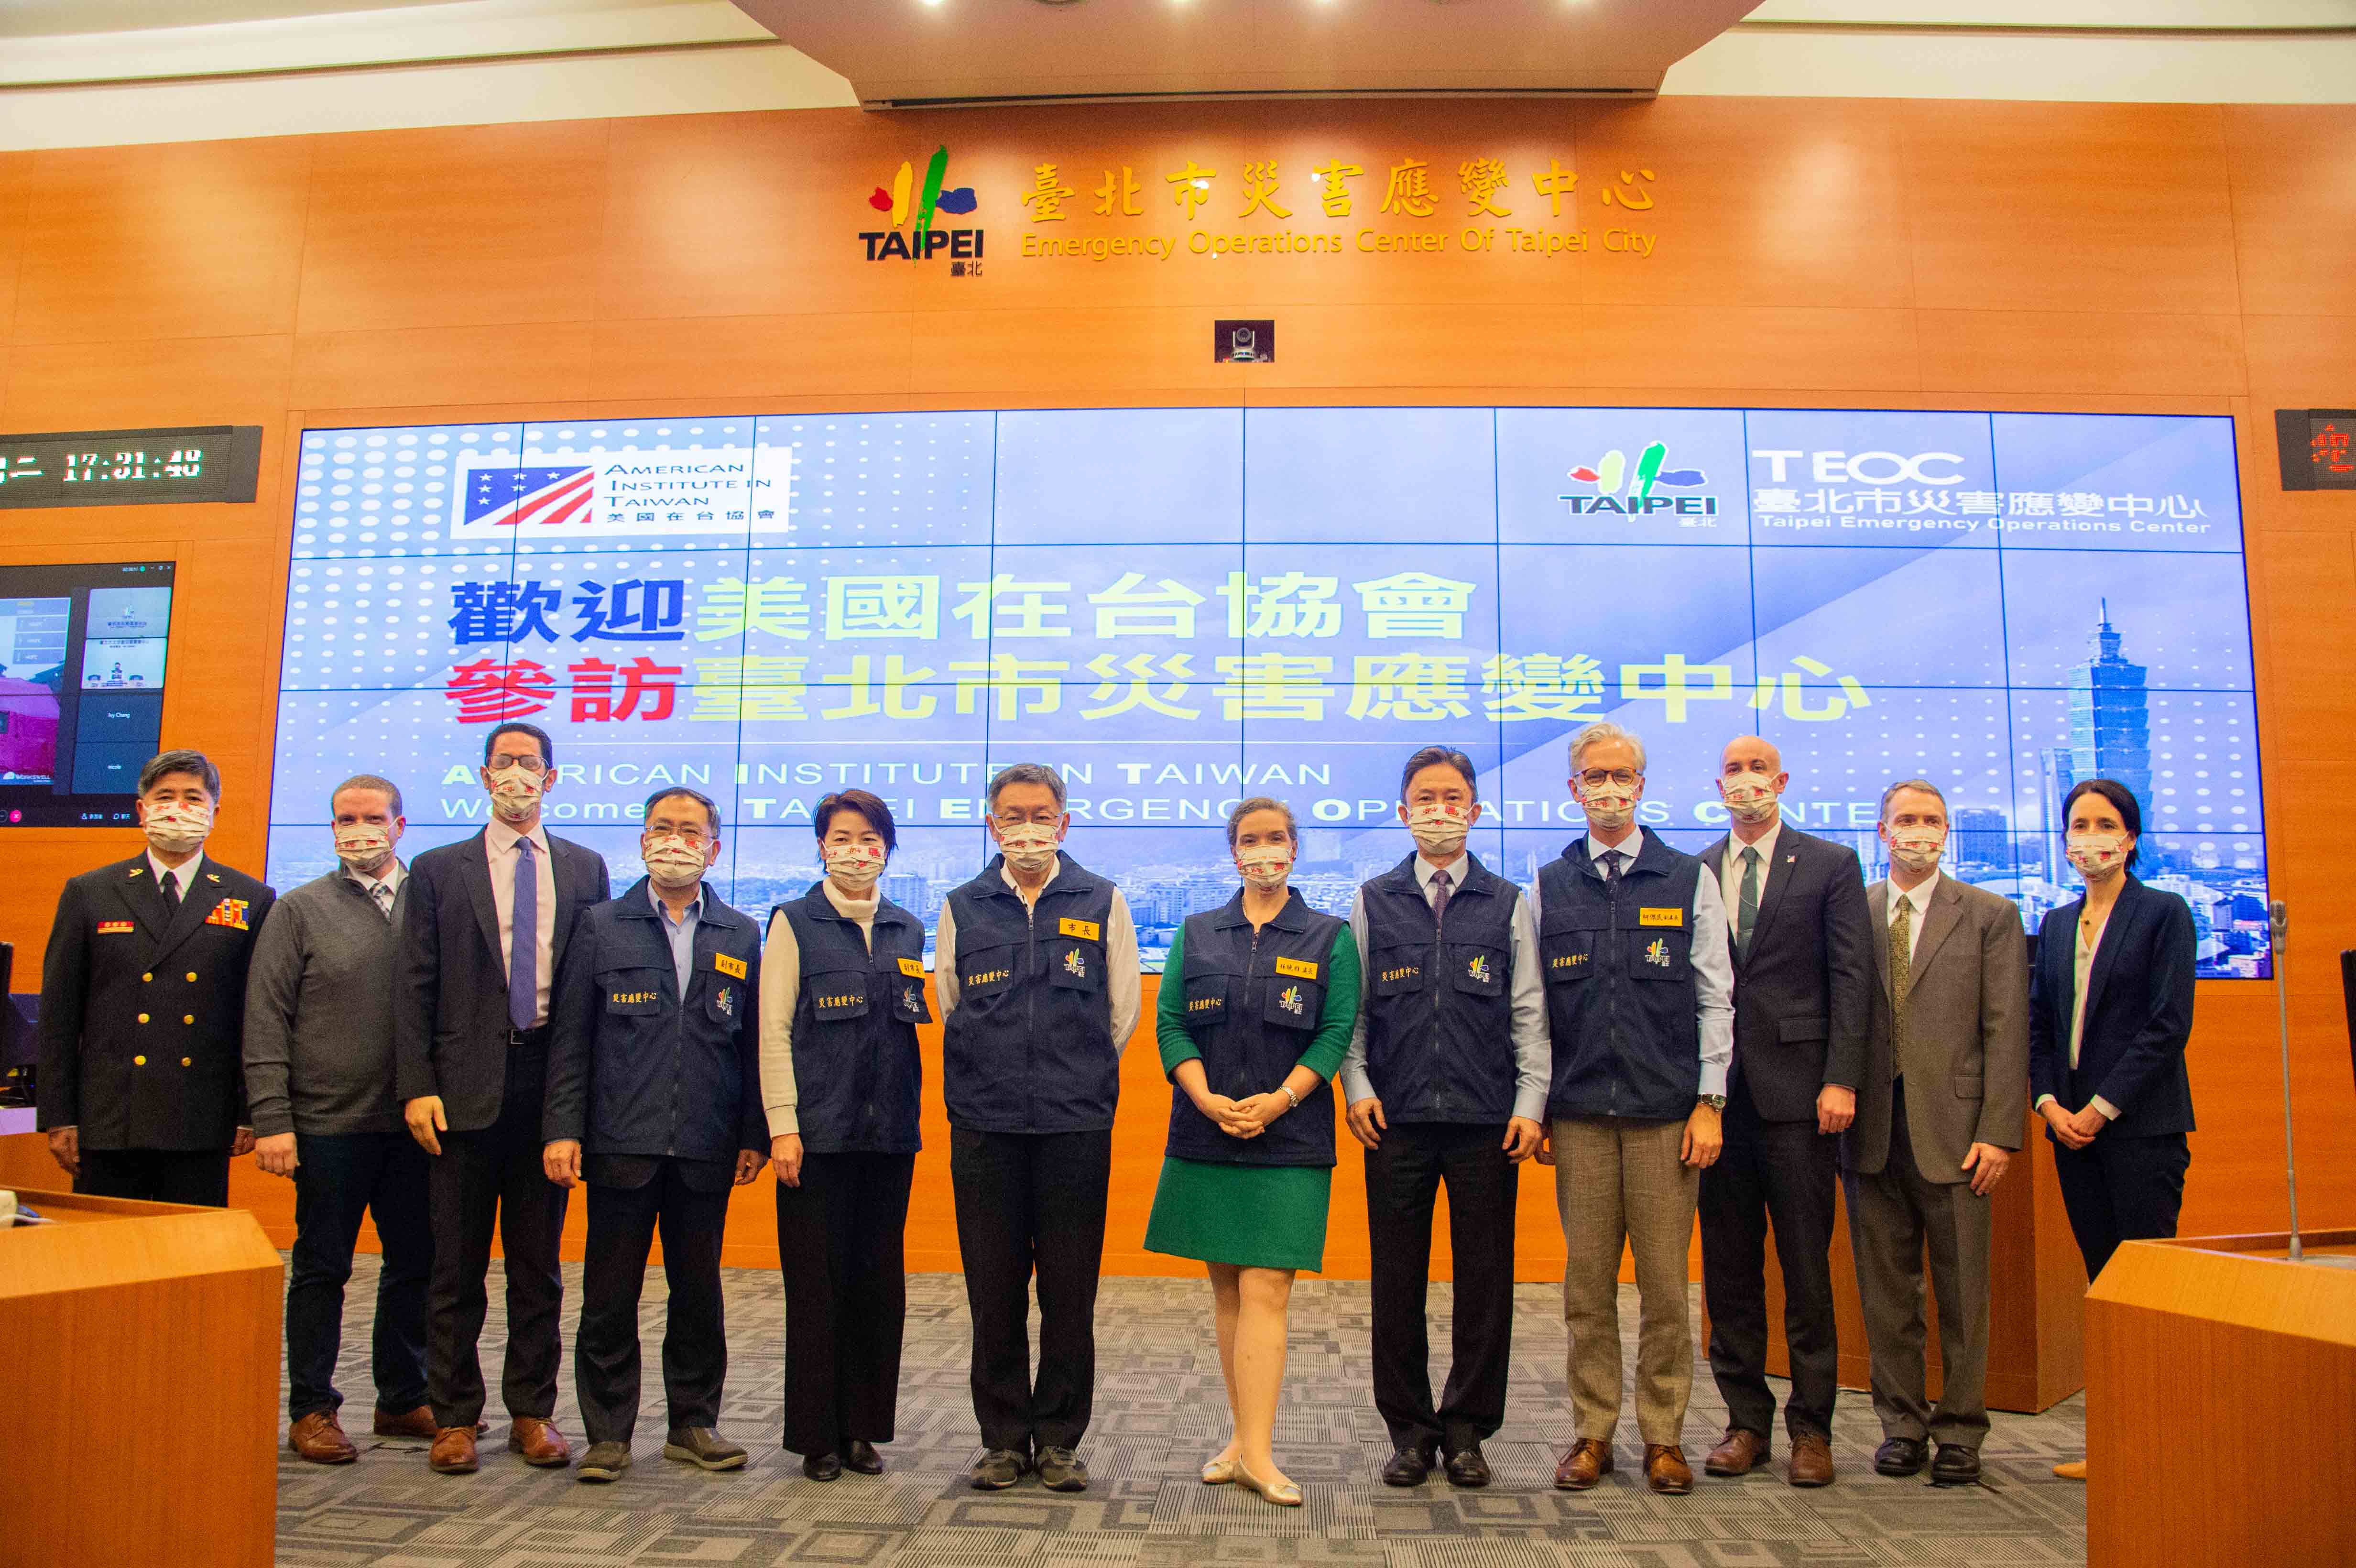 Director Sandra Oudkirk of American Institute in Taiwan led colleagues to visit Taipei Emergency Operations Center